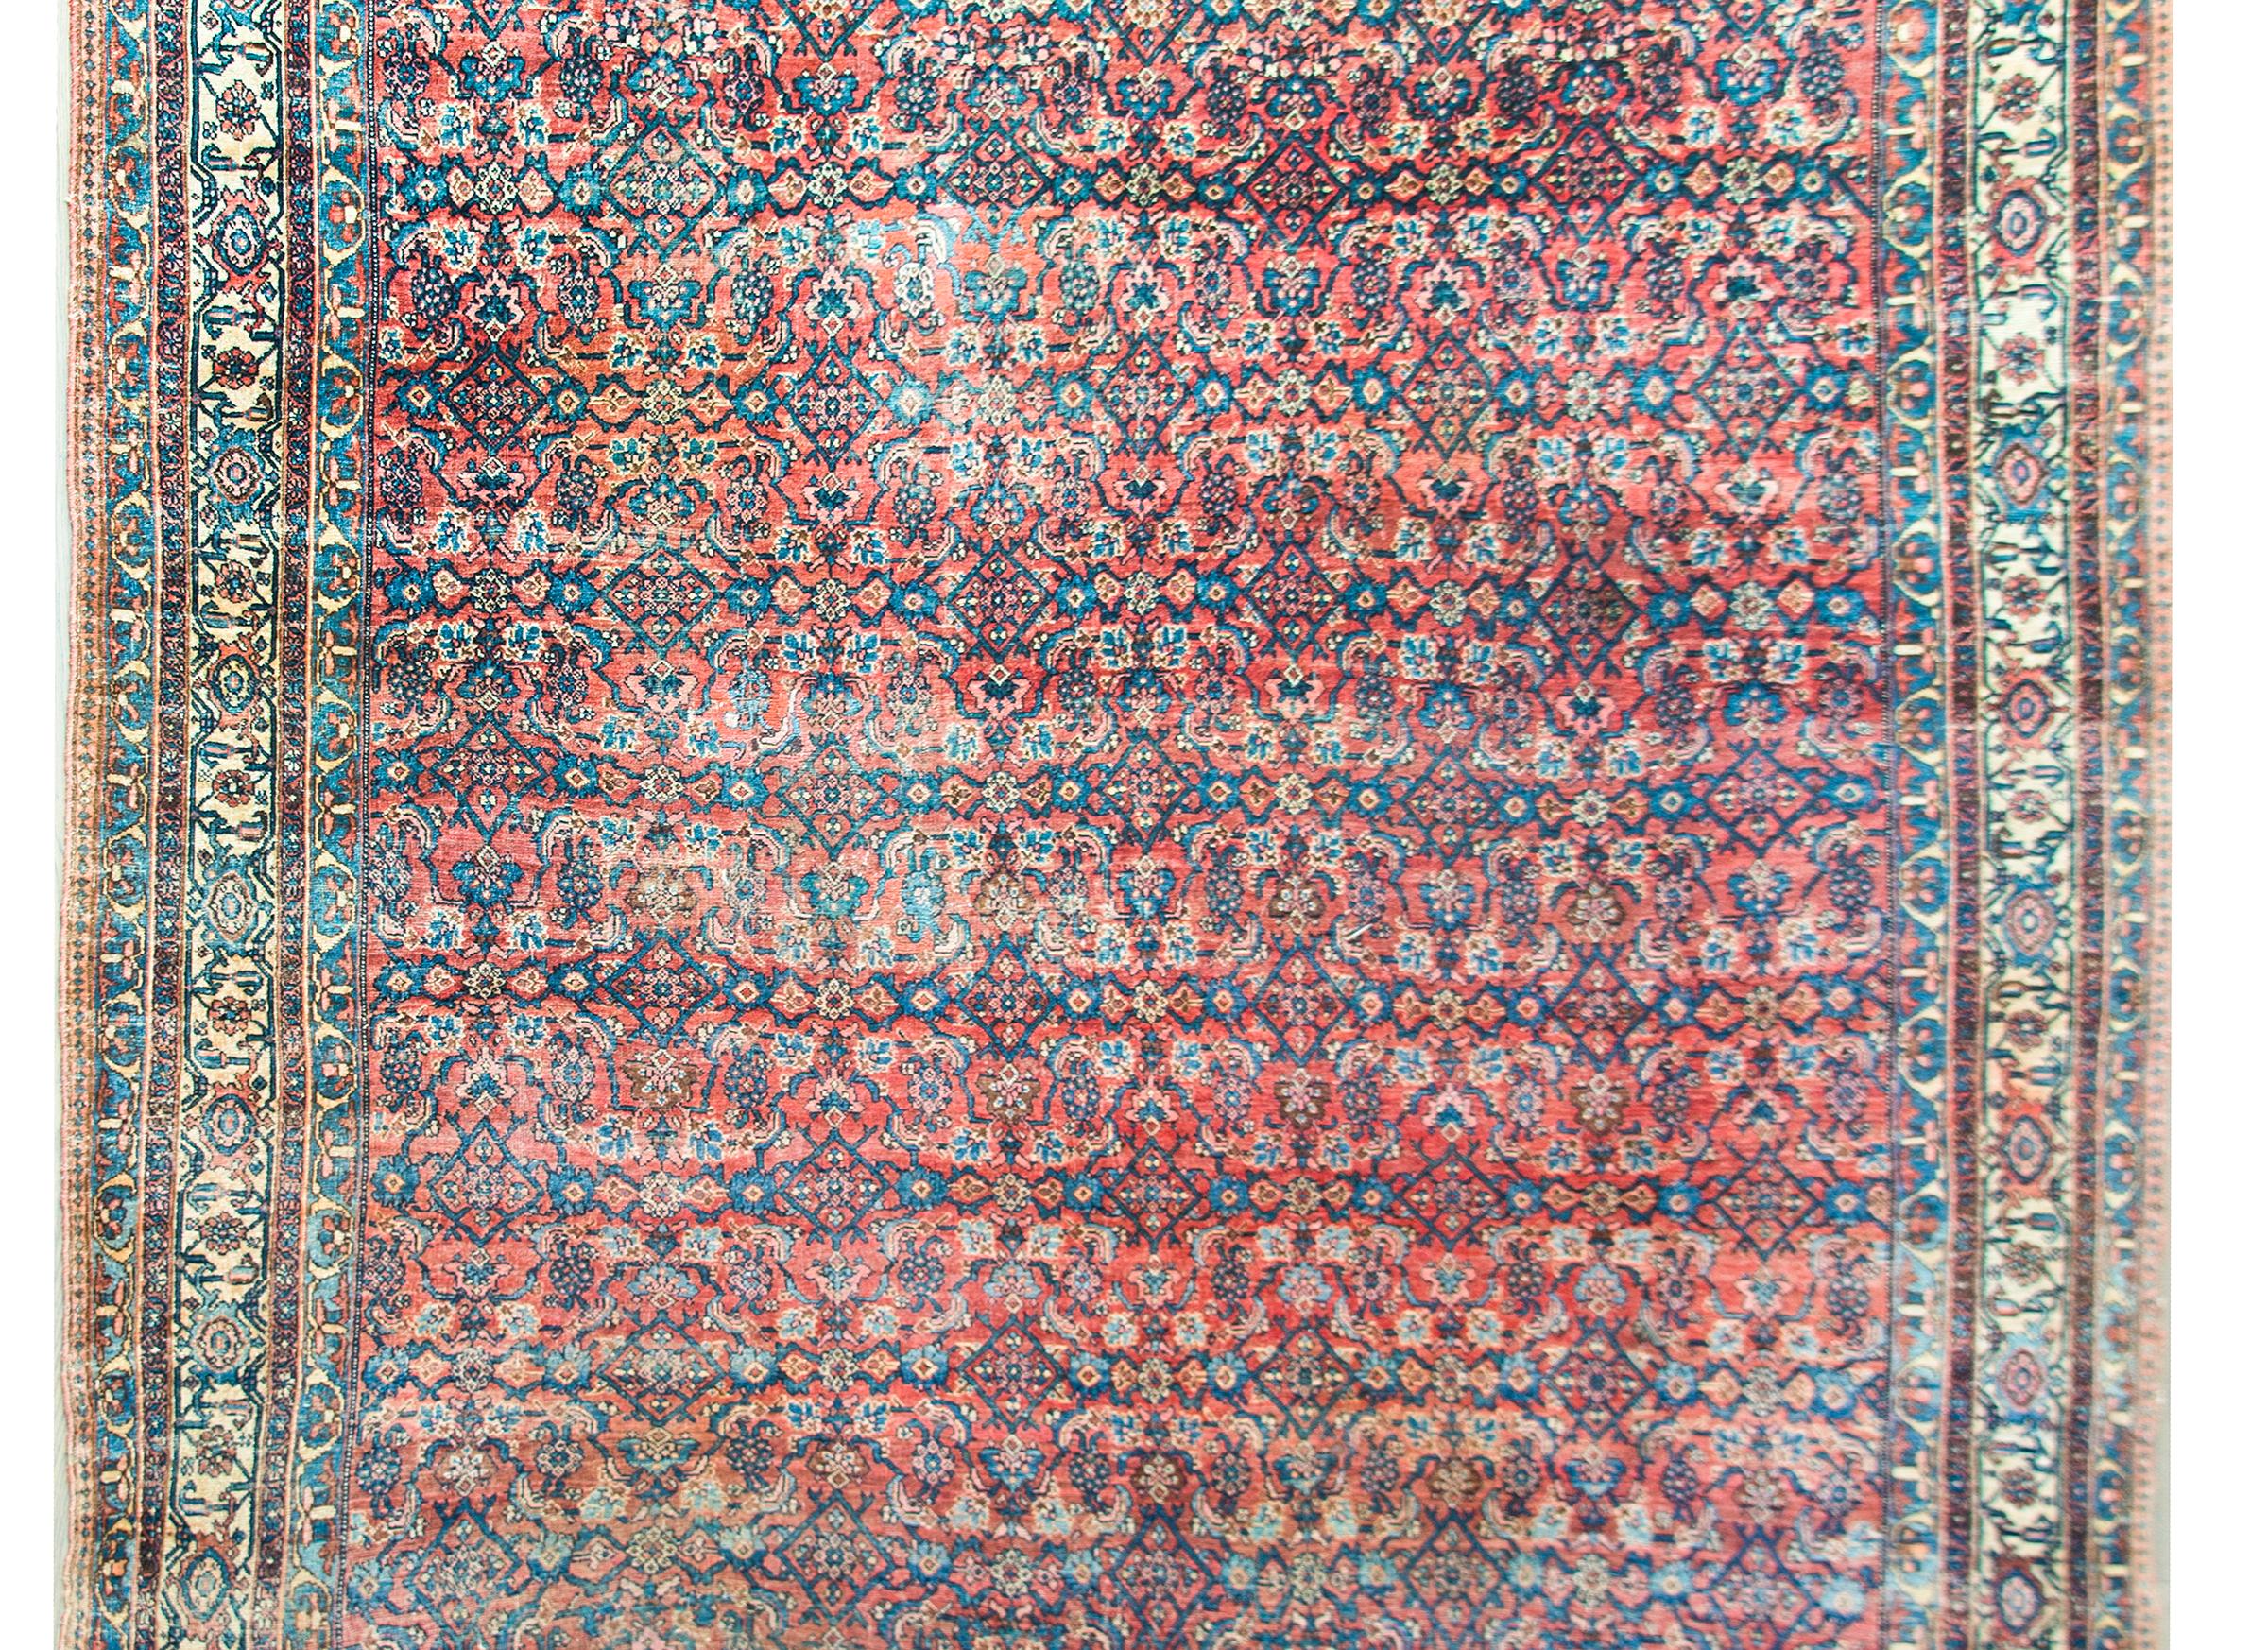 An incredible late 19th century Persian Bidder rug with the most beautiful all-over trellis and floral pattern surrounded by a a complex border containing multiple thin matching floral patterned stripes, all woven in light and dark indigo, cream,